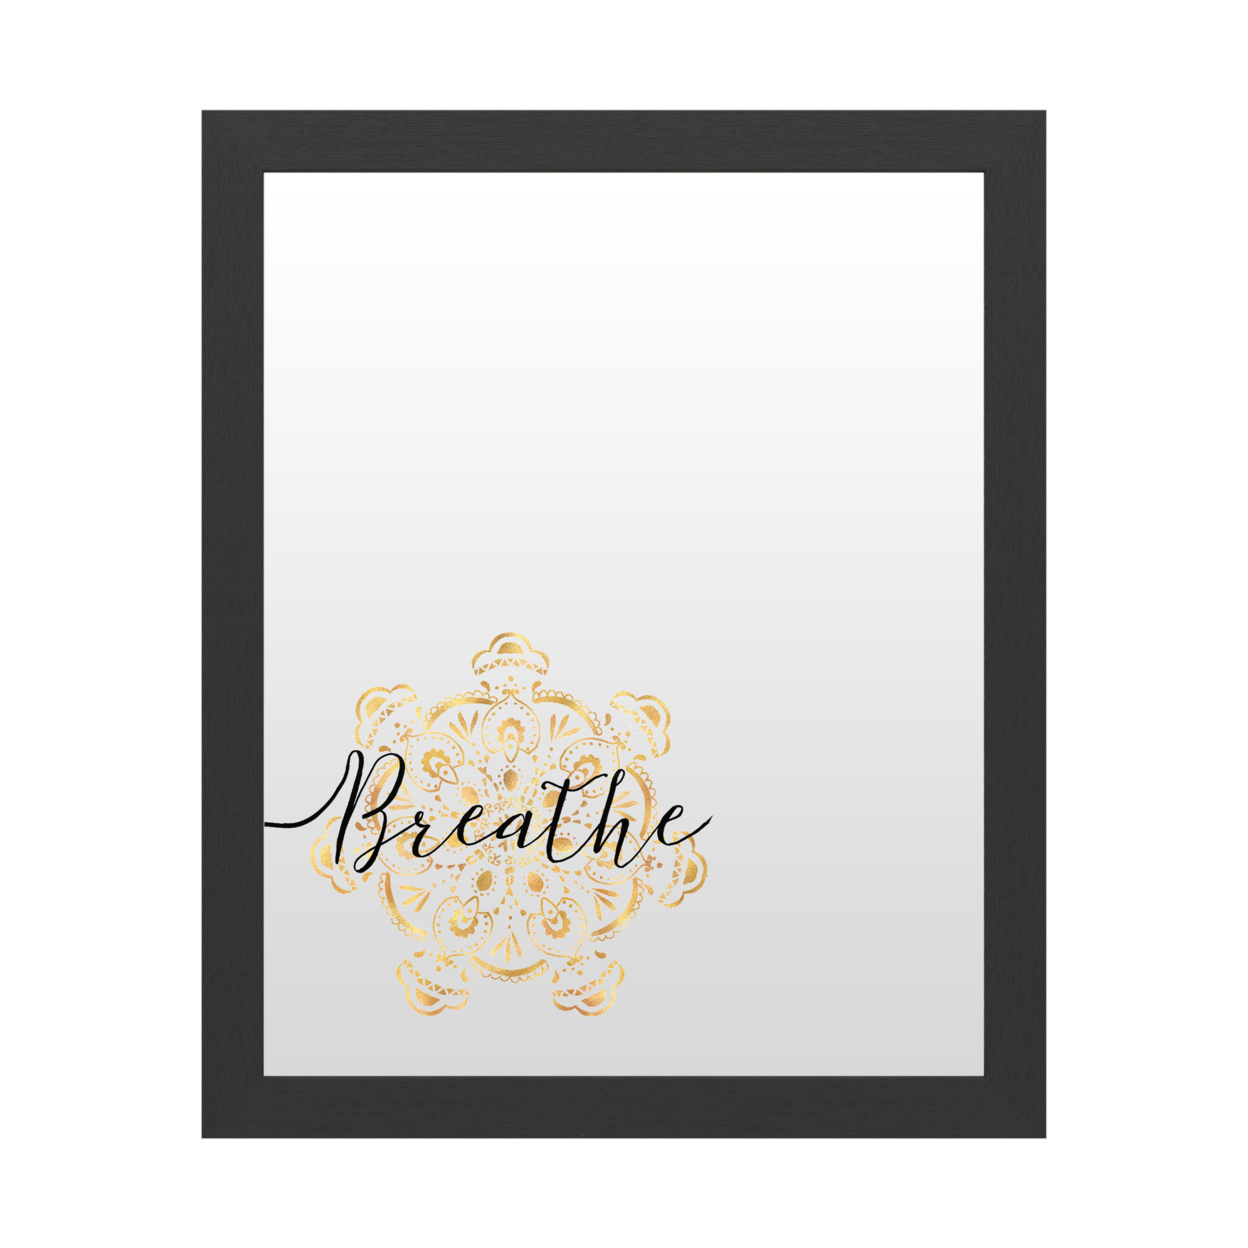 Dry Erase 16 X 20 Marker Board With Printed Artwork - Veronique Charron Namaste II White Board - Ready To Hang